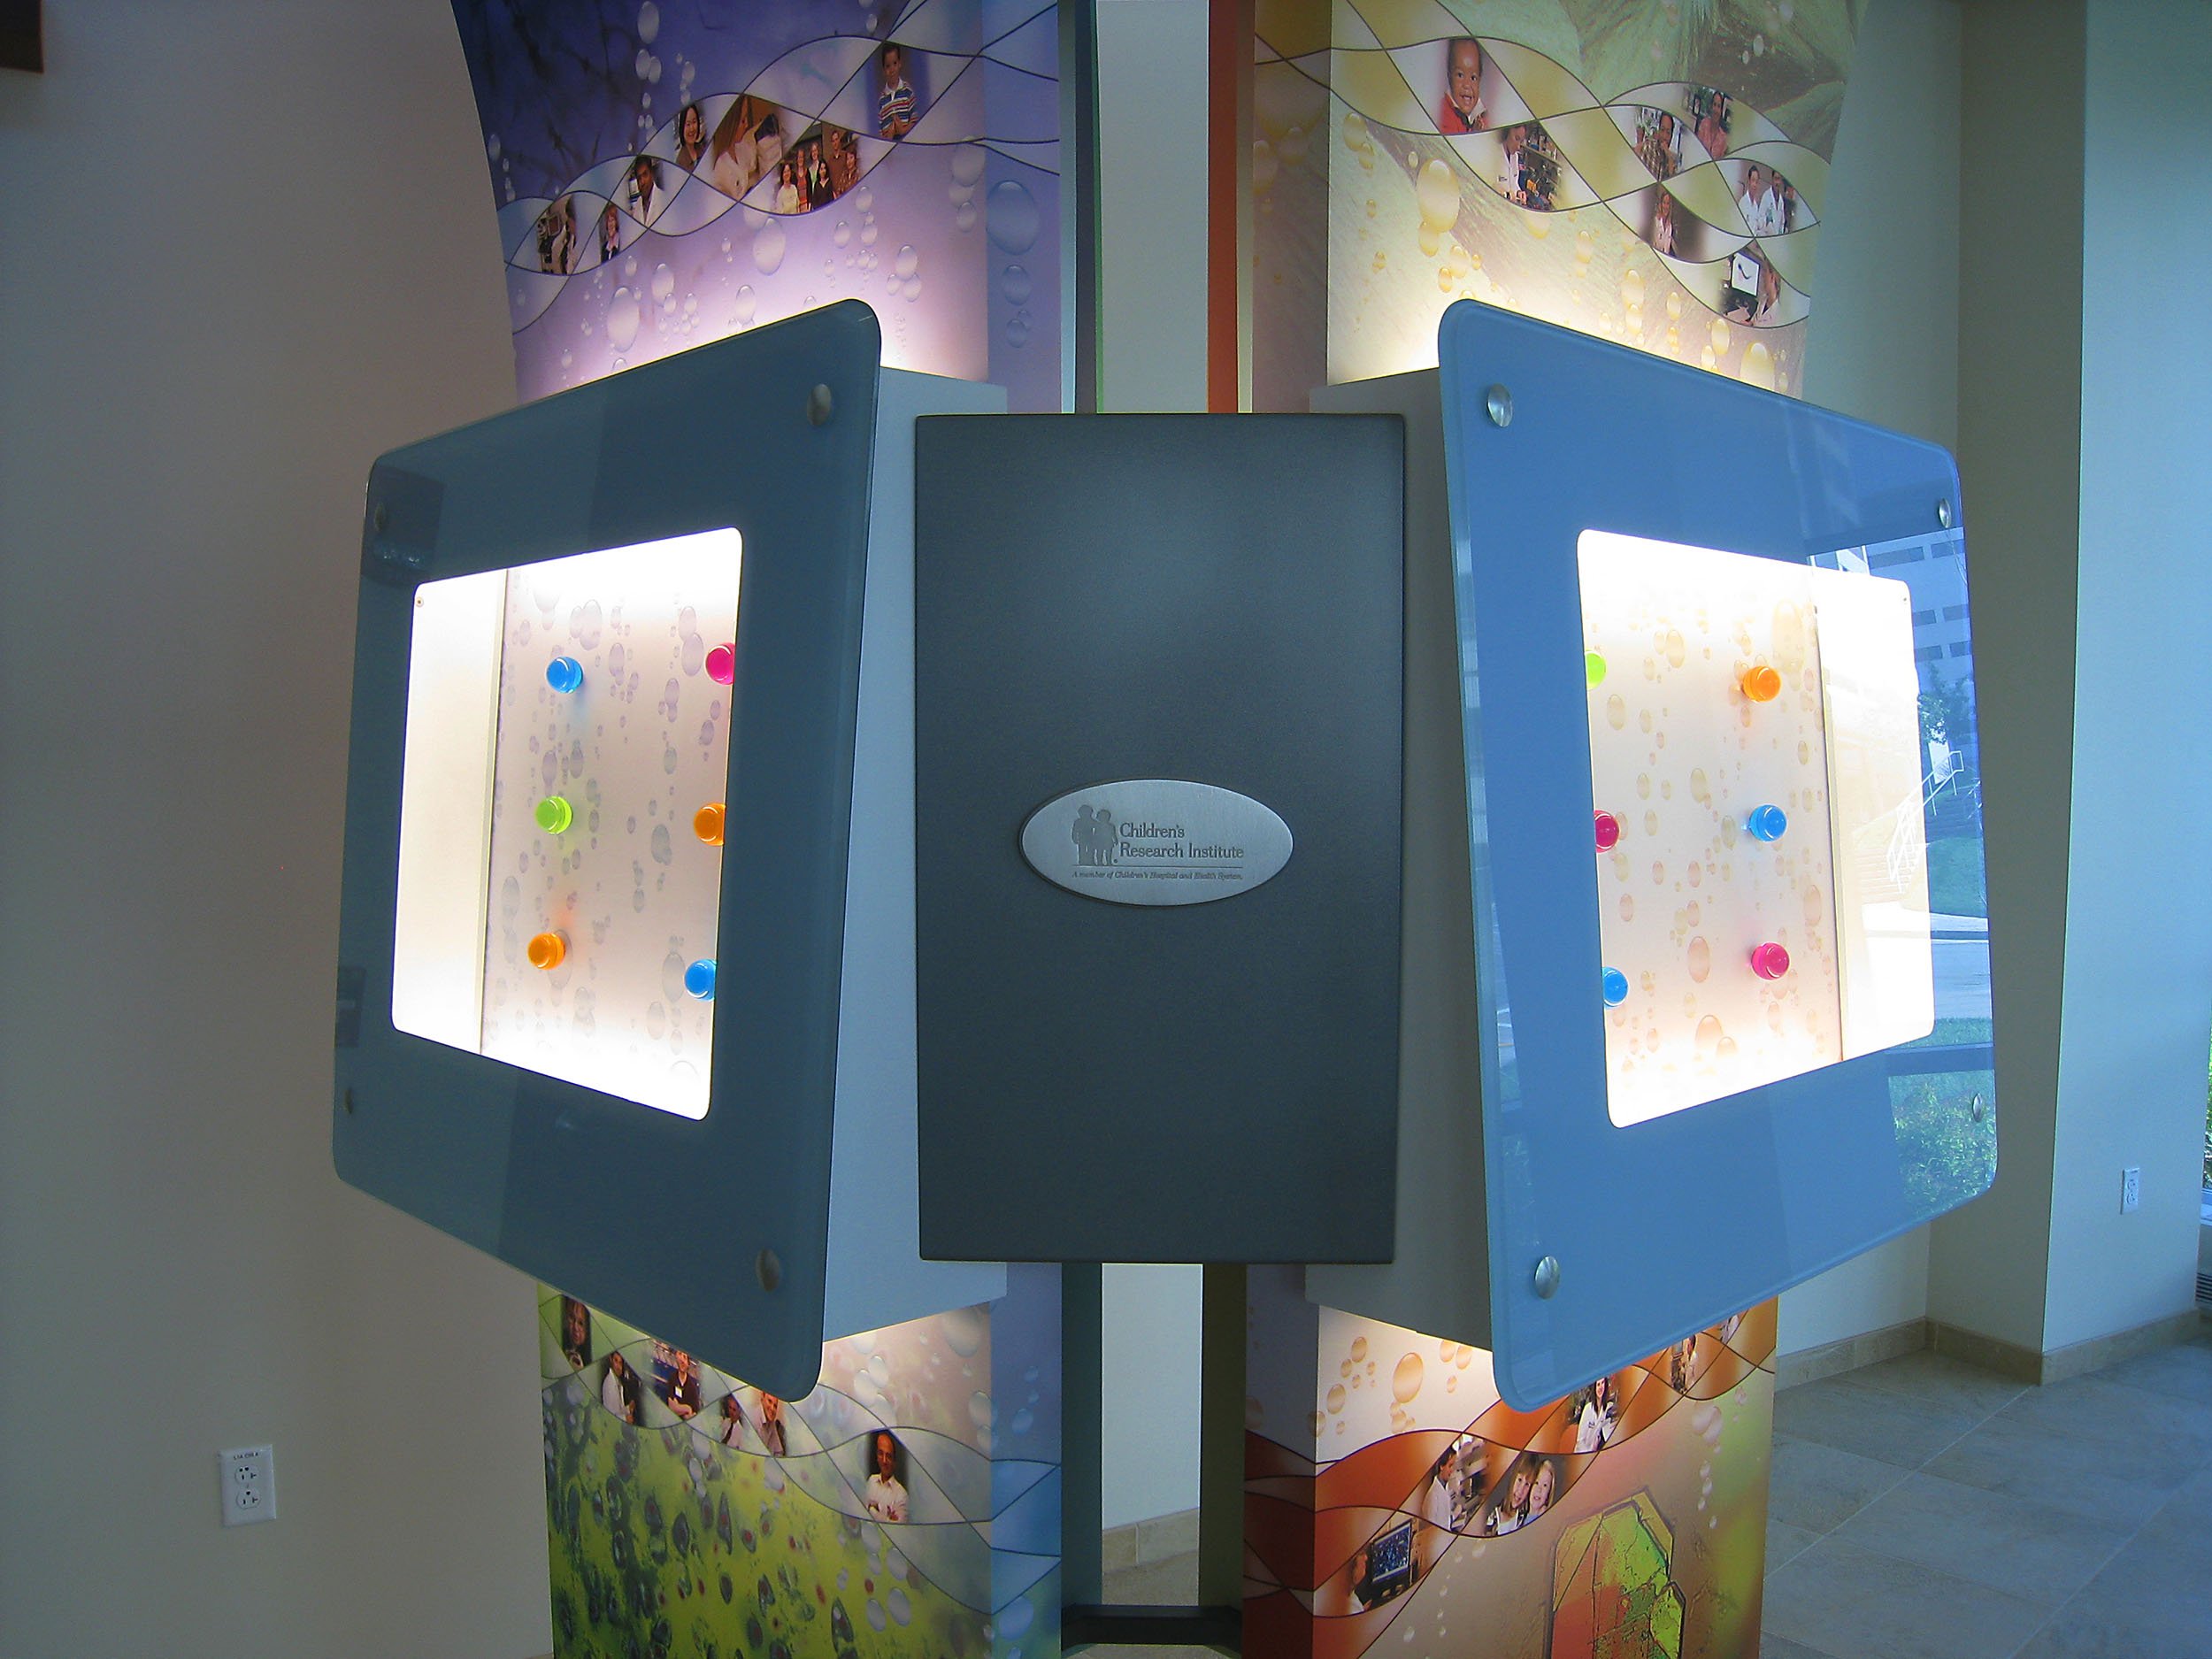 Children's Hospital of Wisconsin Research Institute Interactive Kiosk